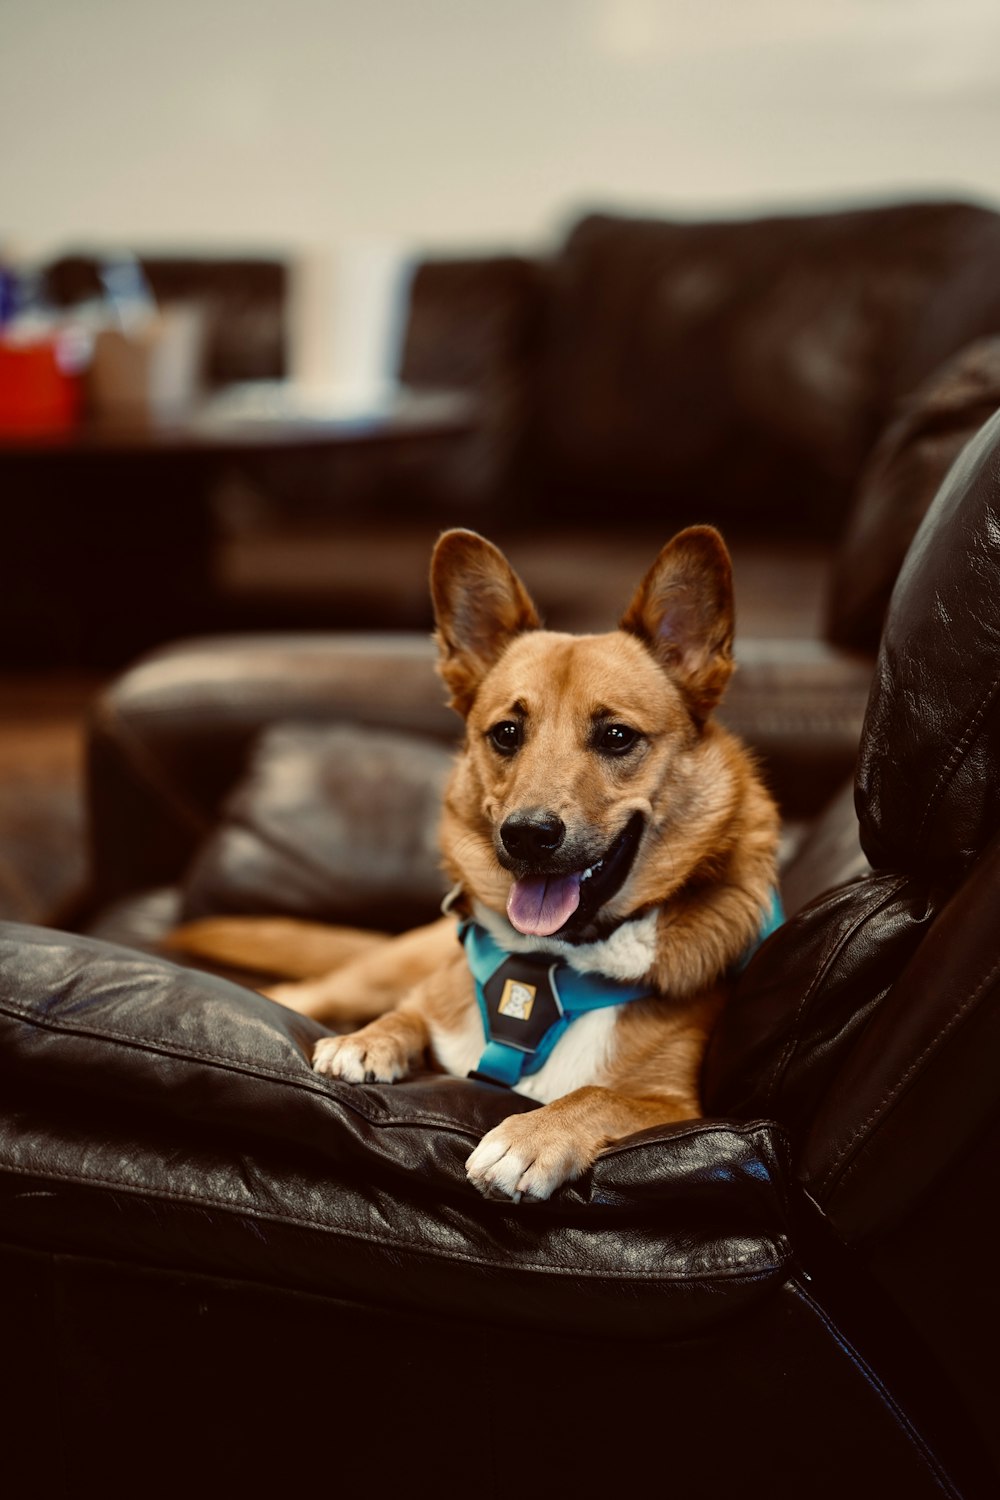 a dog is sitting on a leather chair